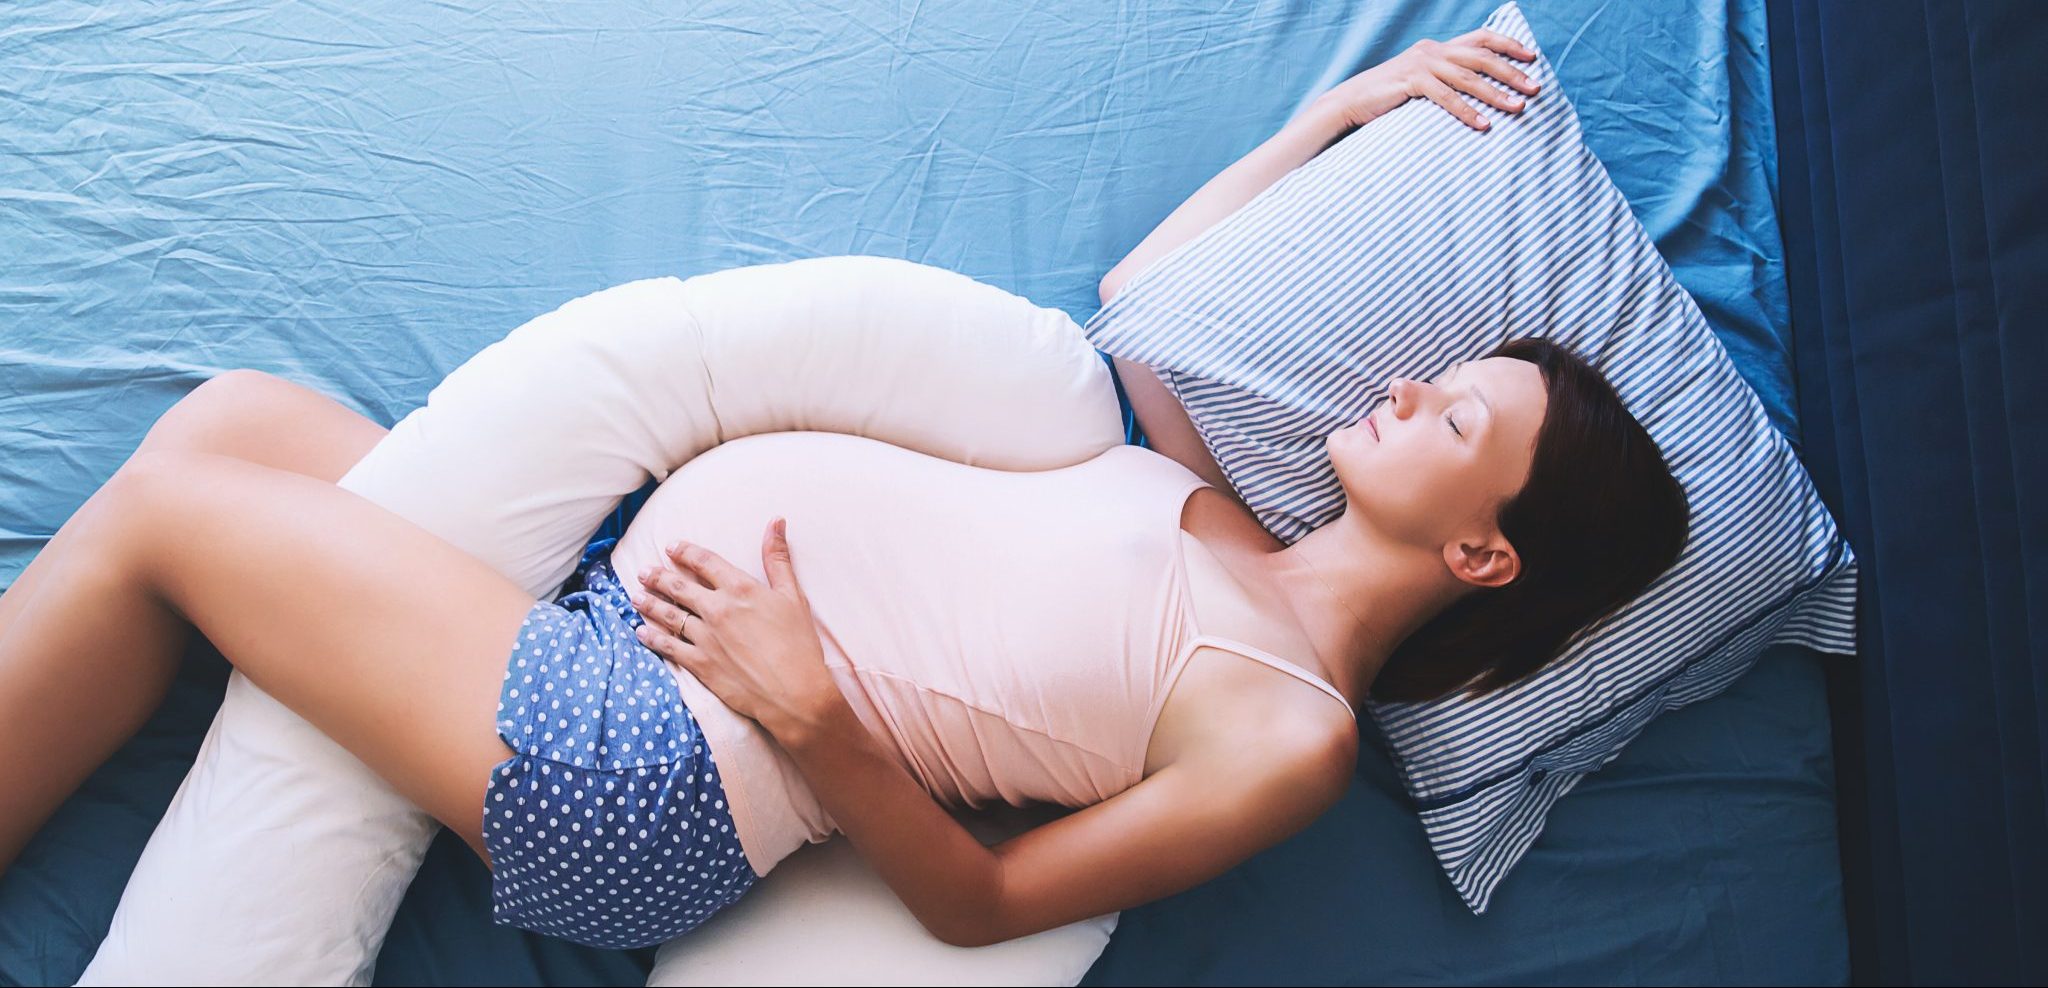 Sleep Problems During Pregnancy? Here’s What You Can Do